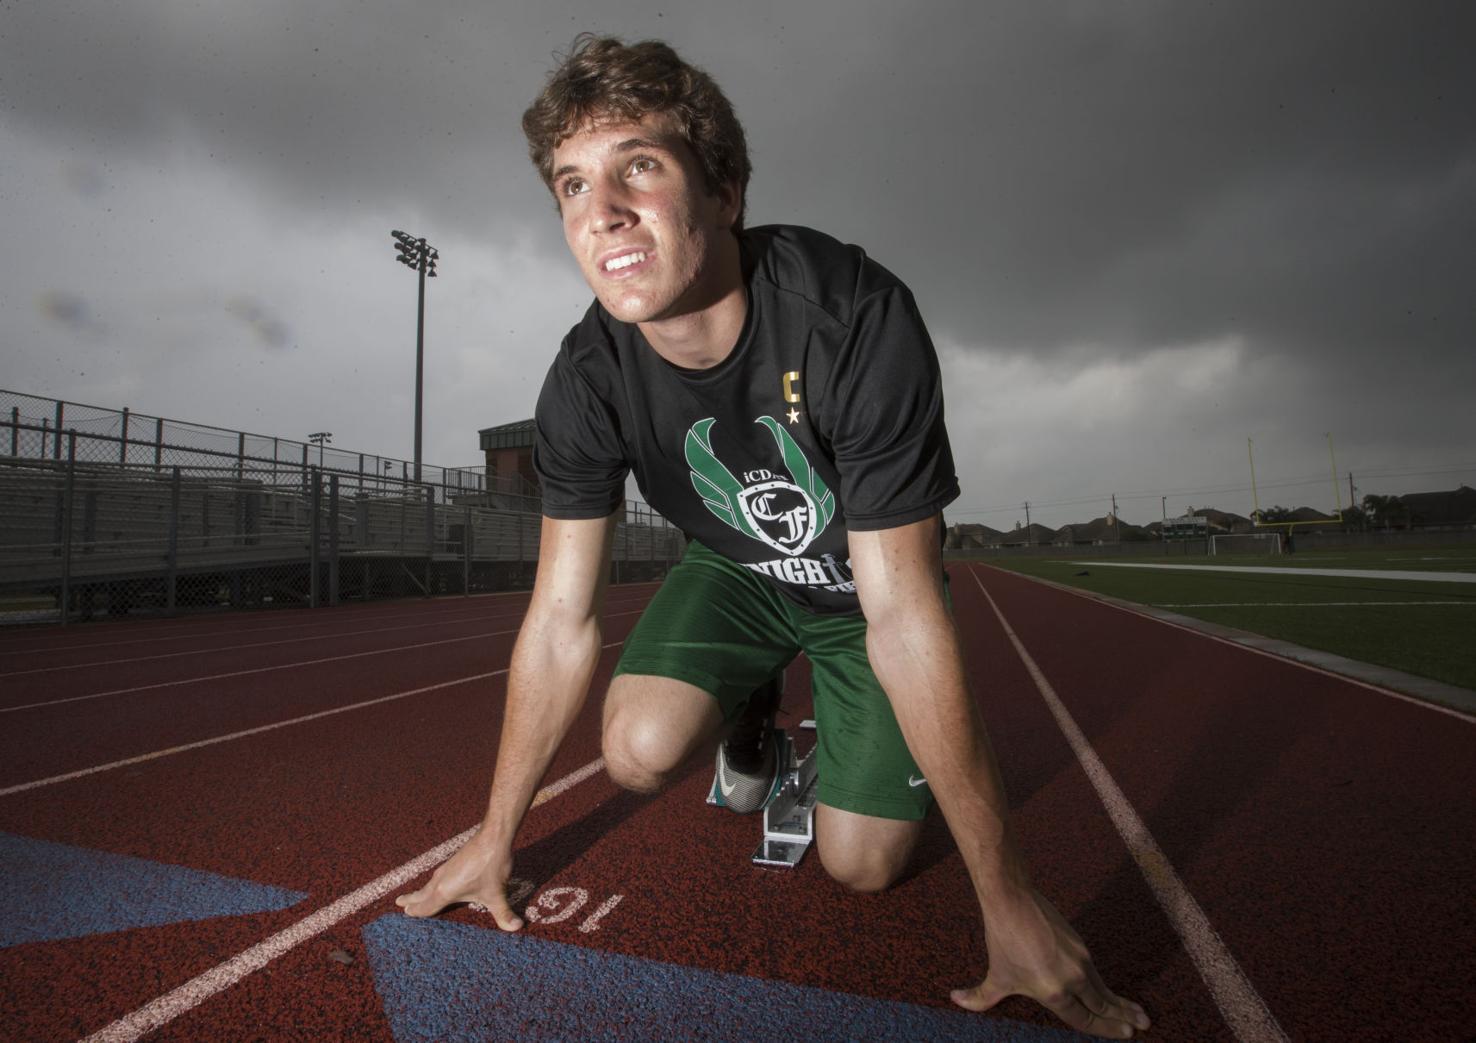 After late switch to sprinting, Clear Falls’ Rainey headed to state in